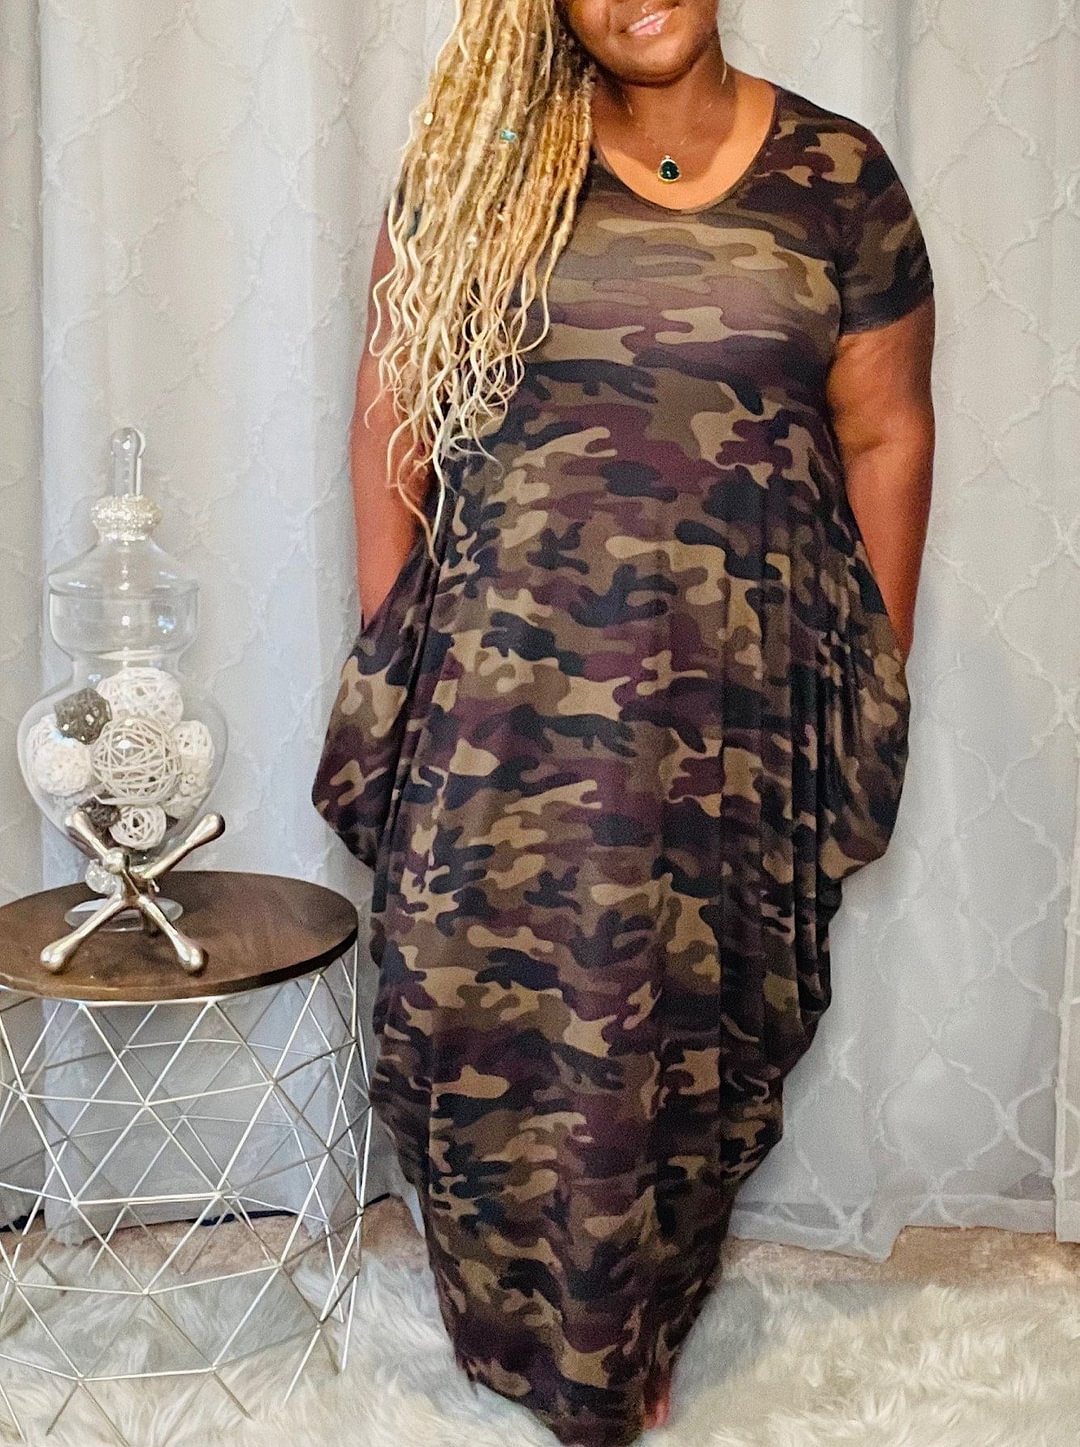 The Camouflage Maxi Dress